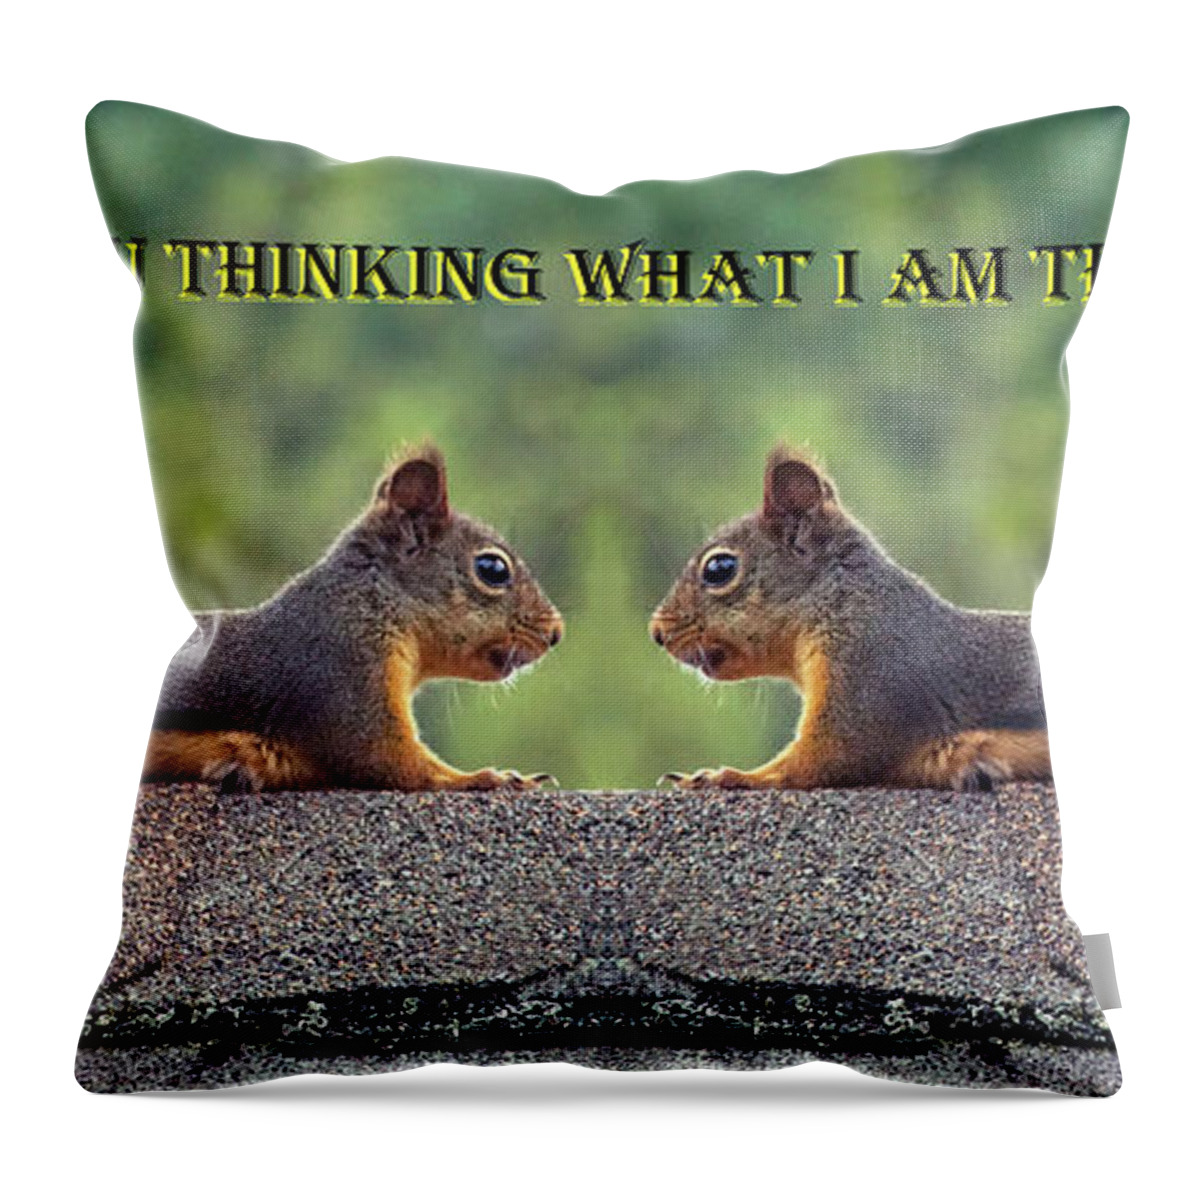 Squirrels Throw Pillow featuring the photograph Are You Thinking What I Am Thinking by Ben Upham III